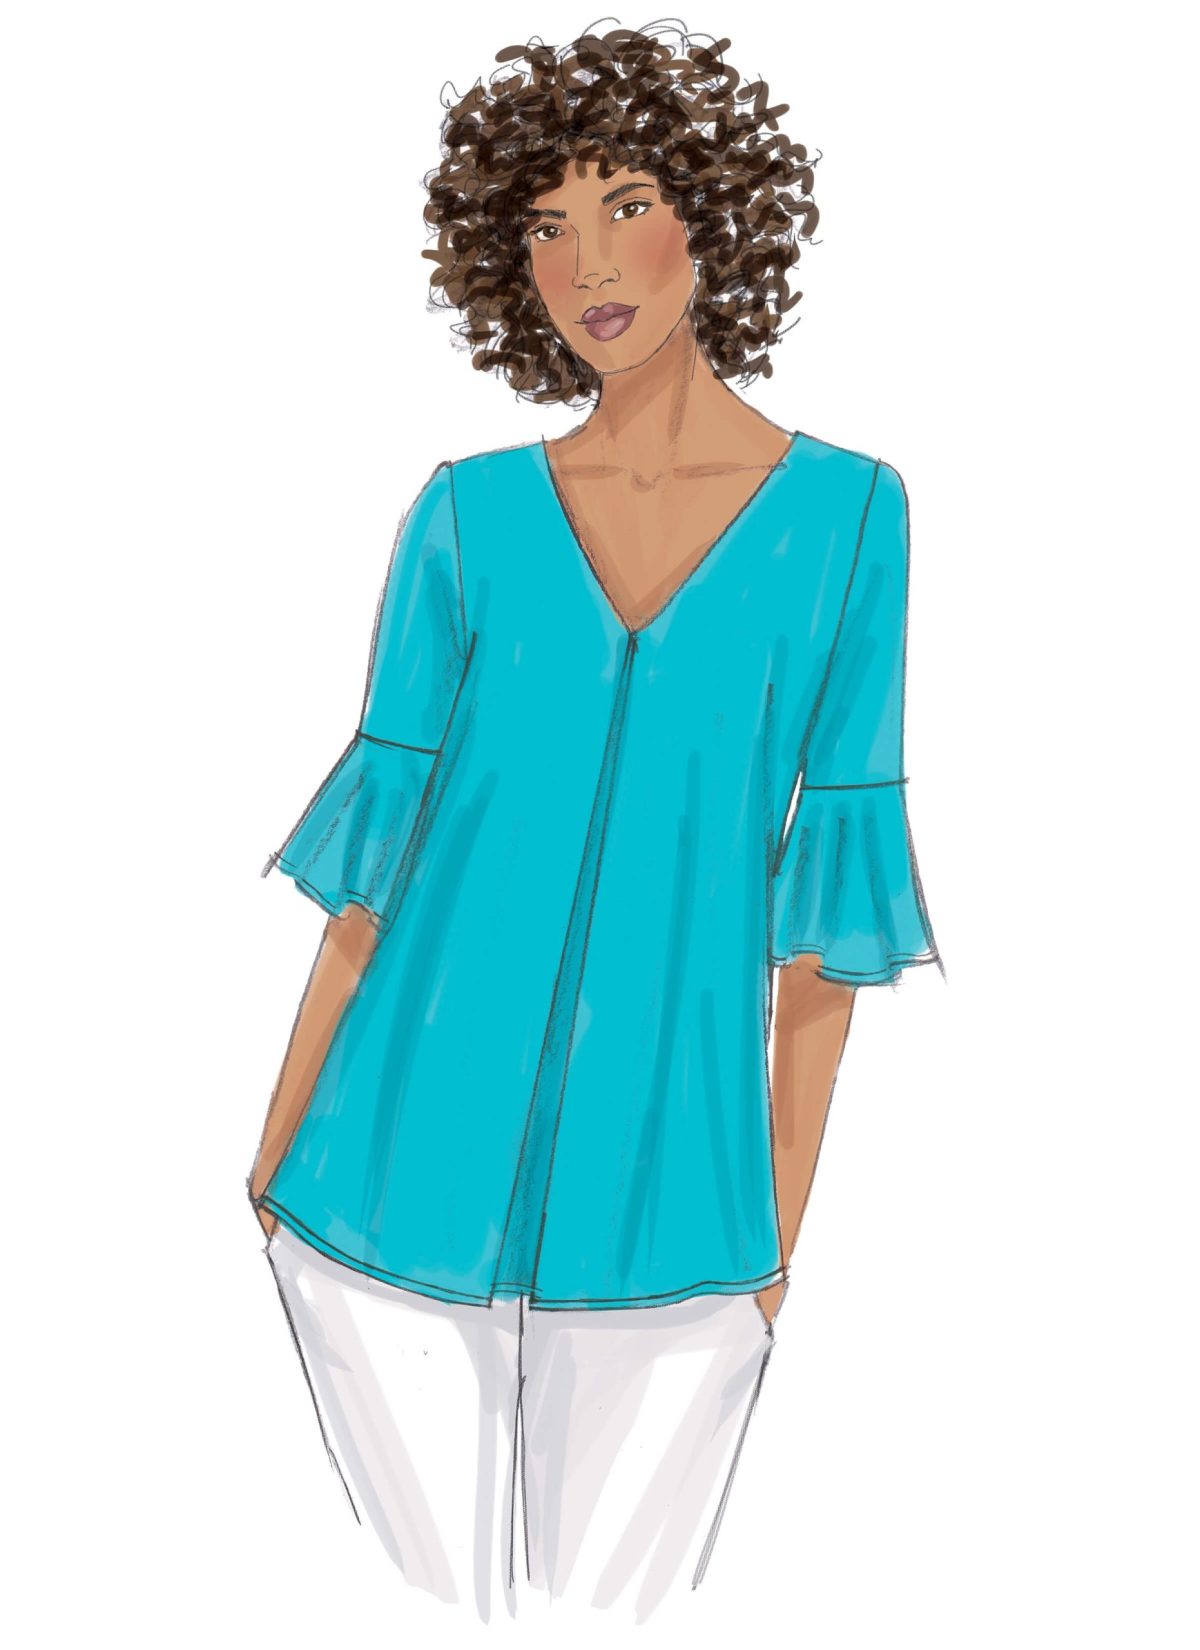 Butterick Sewing Pattern B6456 Misses' Tulip or Ruffle Sleeve Tops